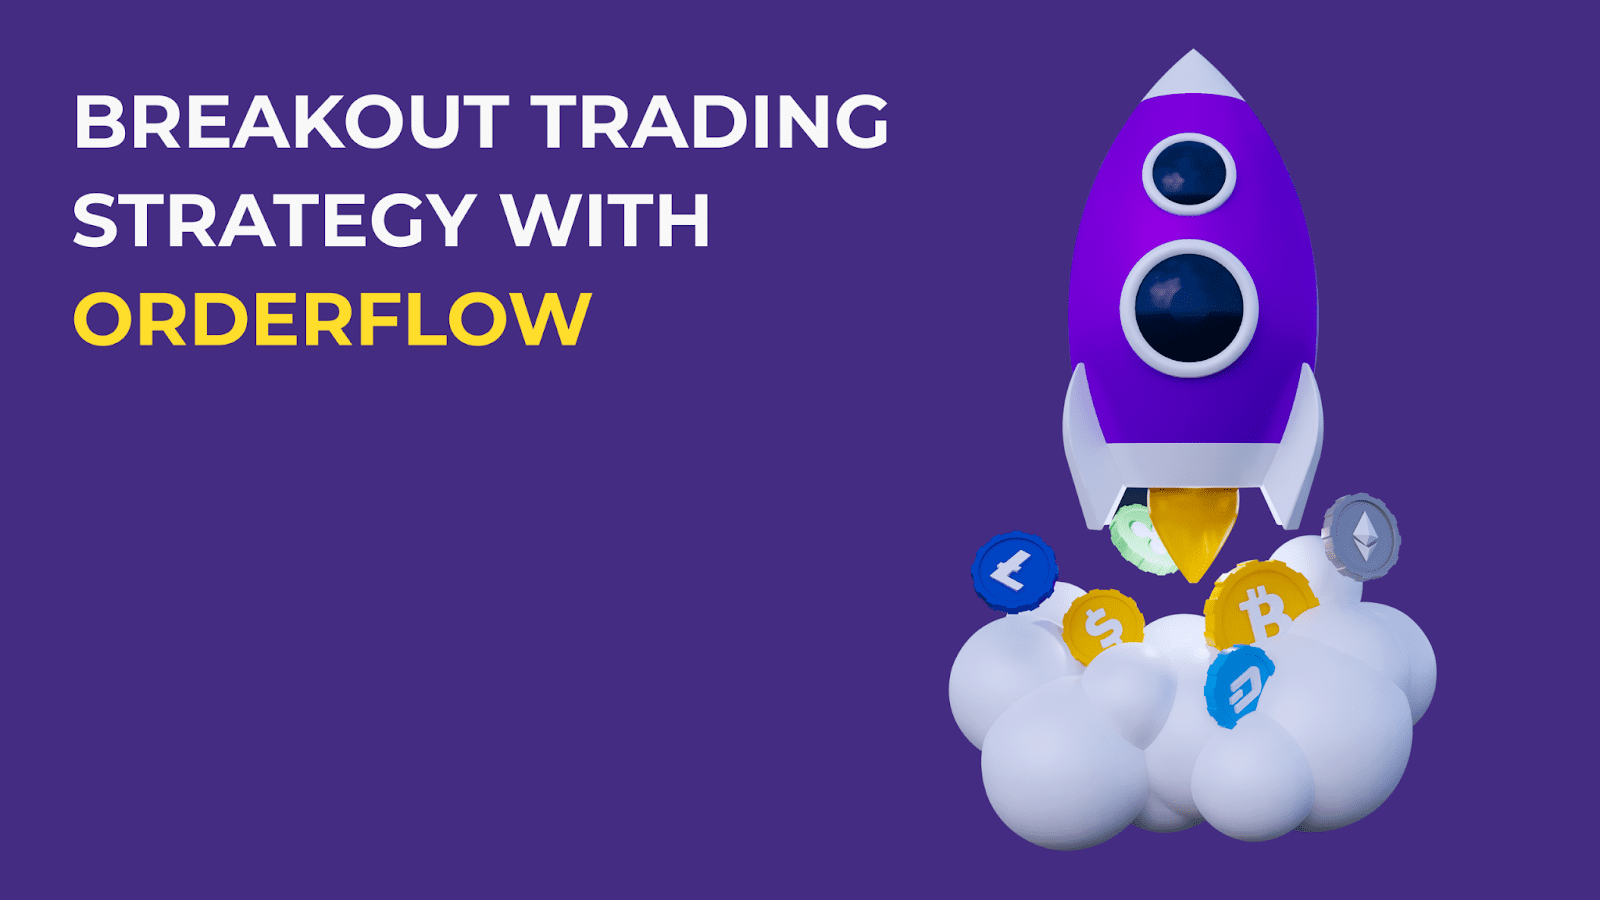 Breakout trading strategy with OrderFLow